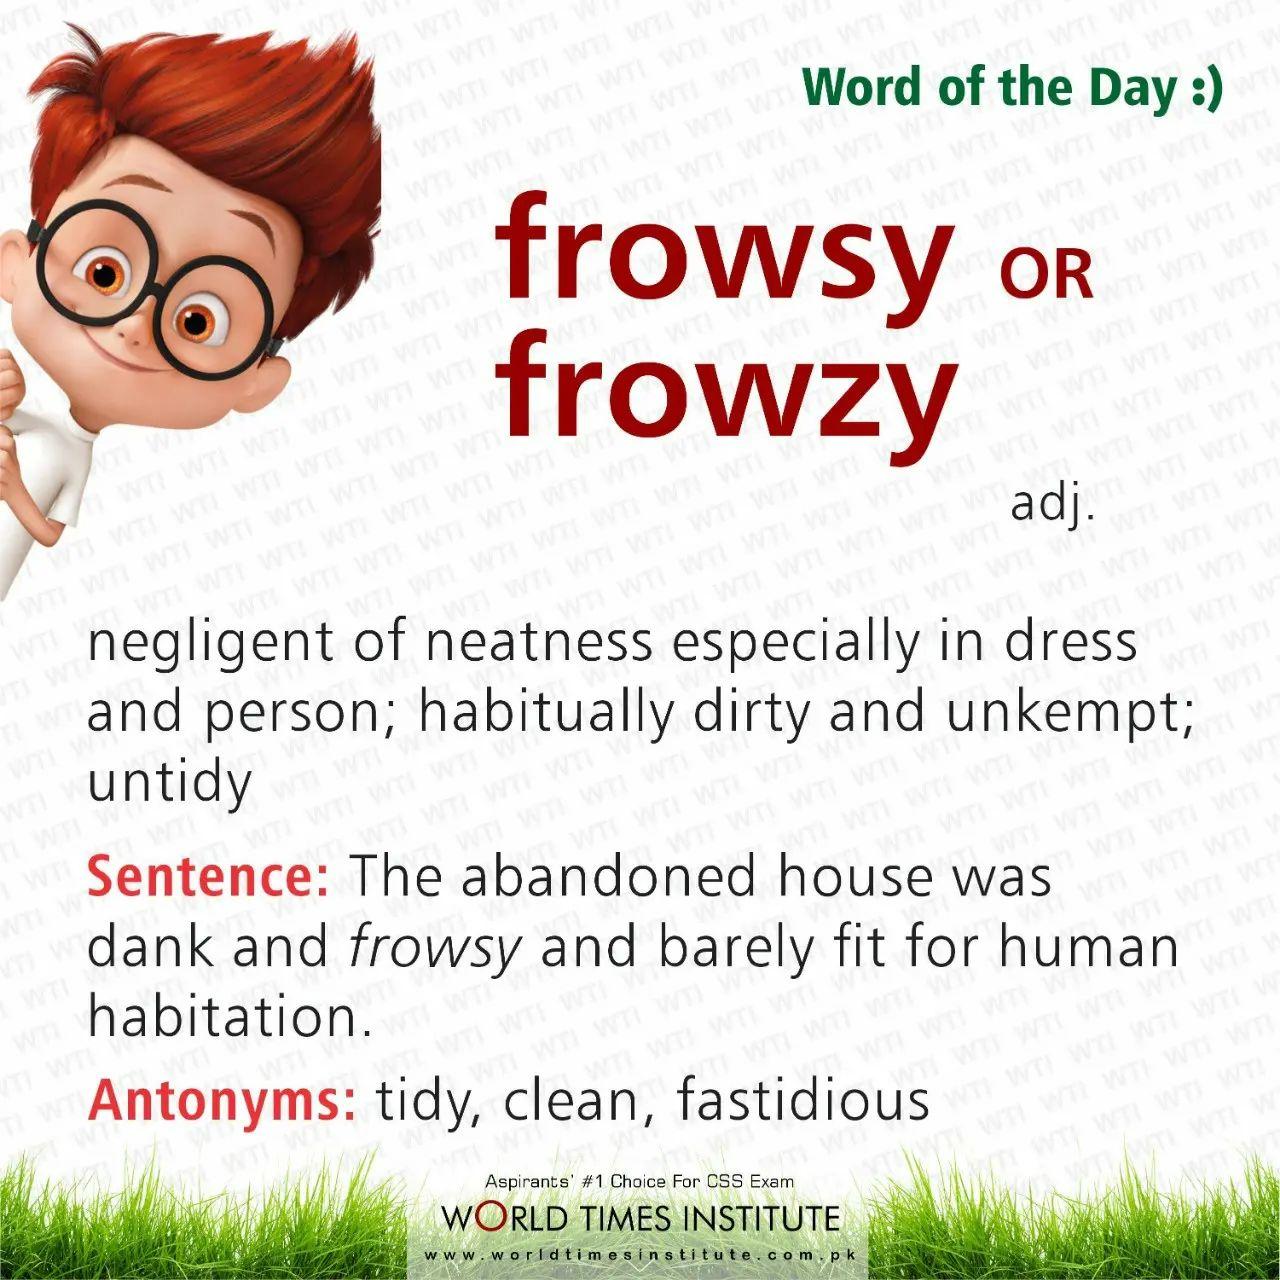 You are currently viewing Word of the Day-Frowsy or Frowzy